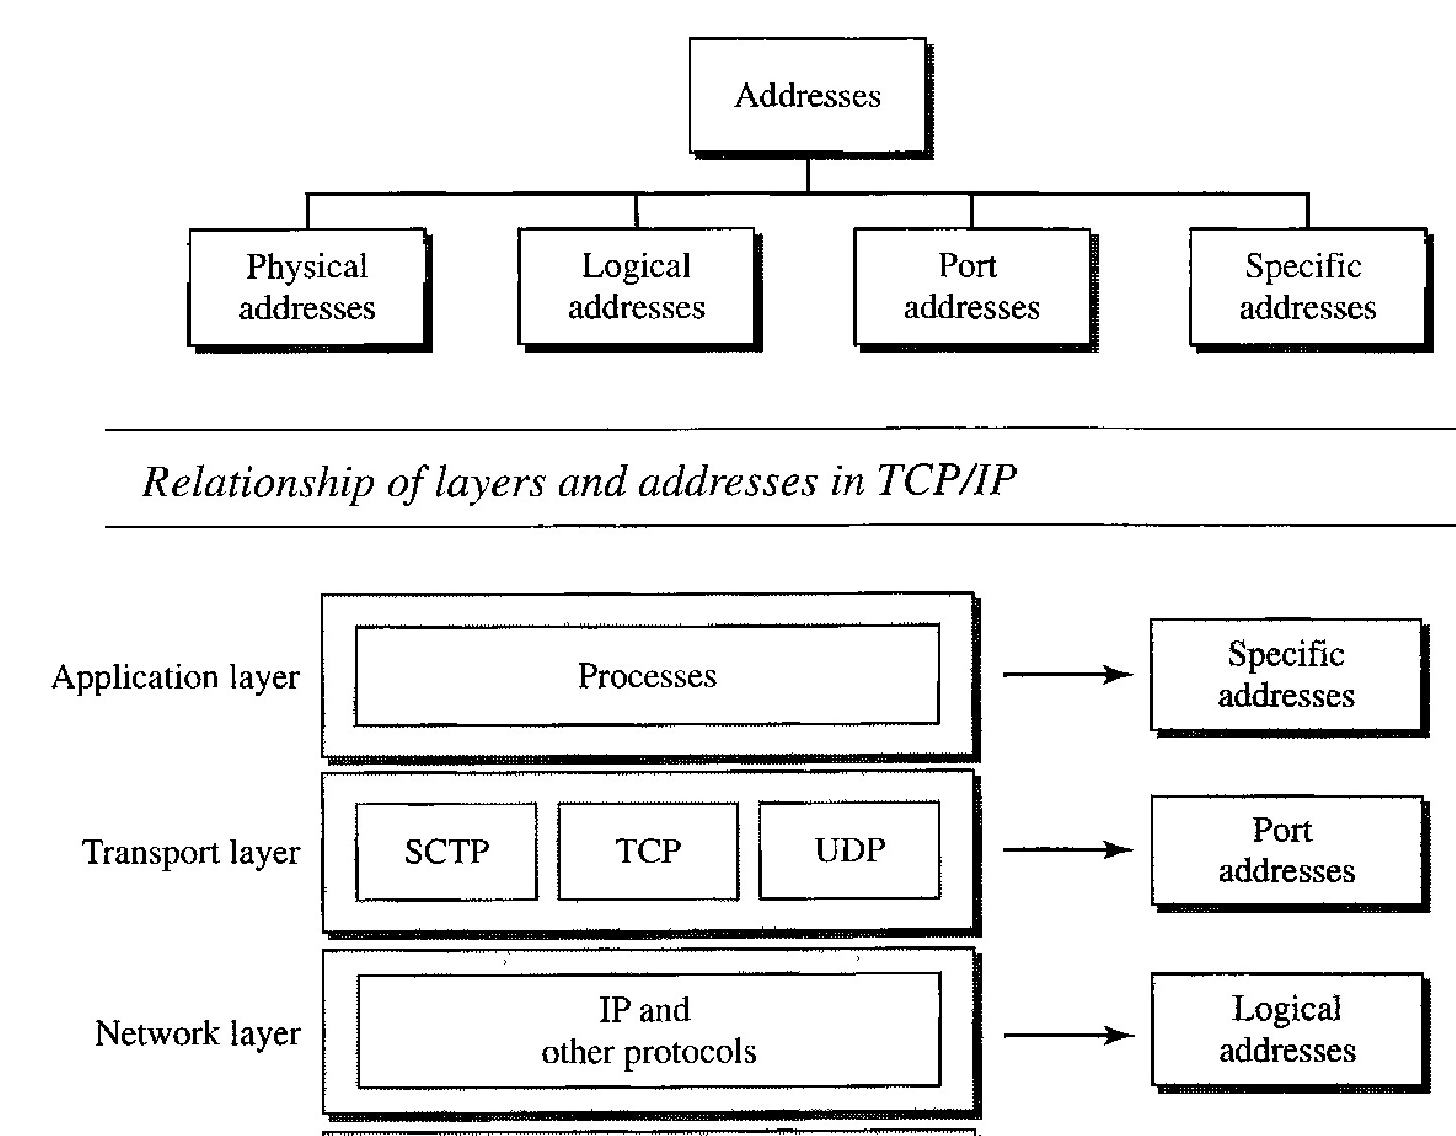 Four levels of addresses are used in an internet employing the TCP/IP protocols